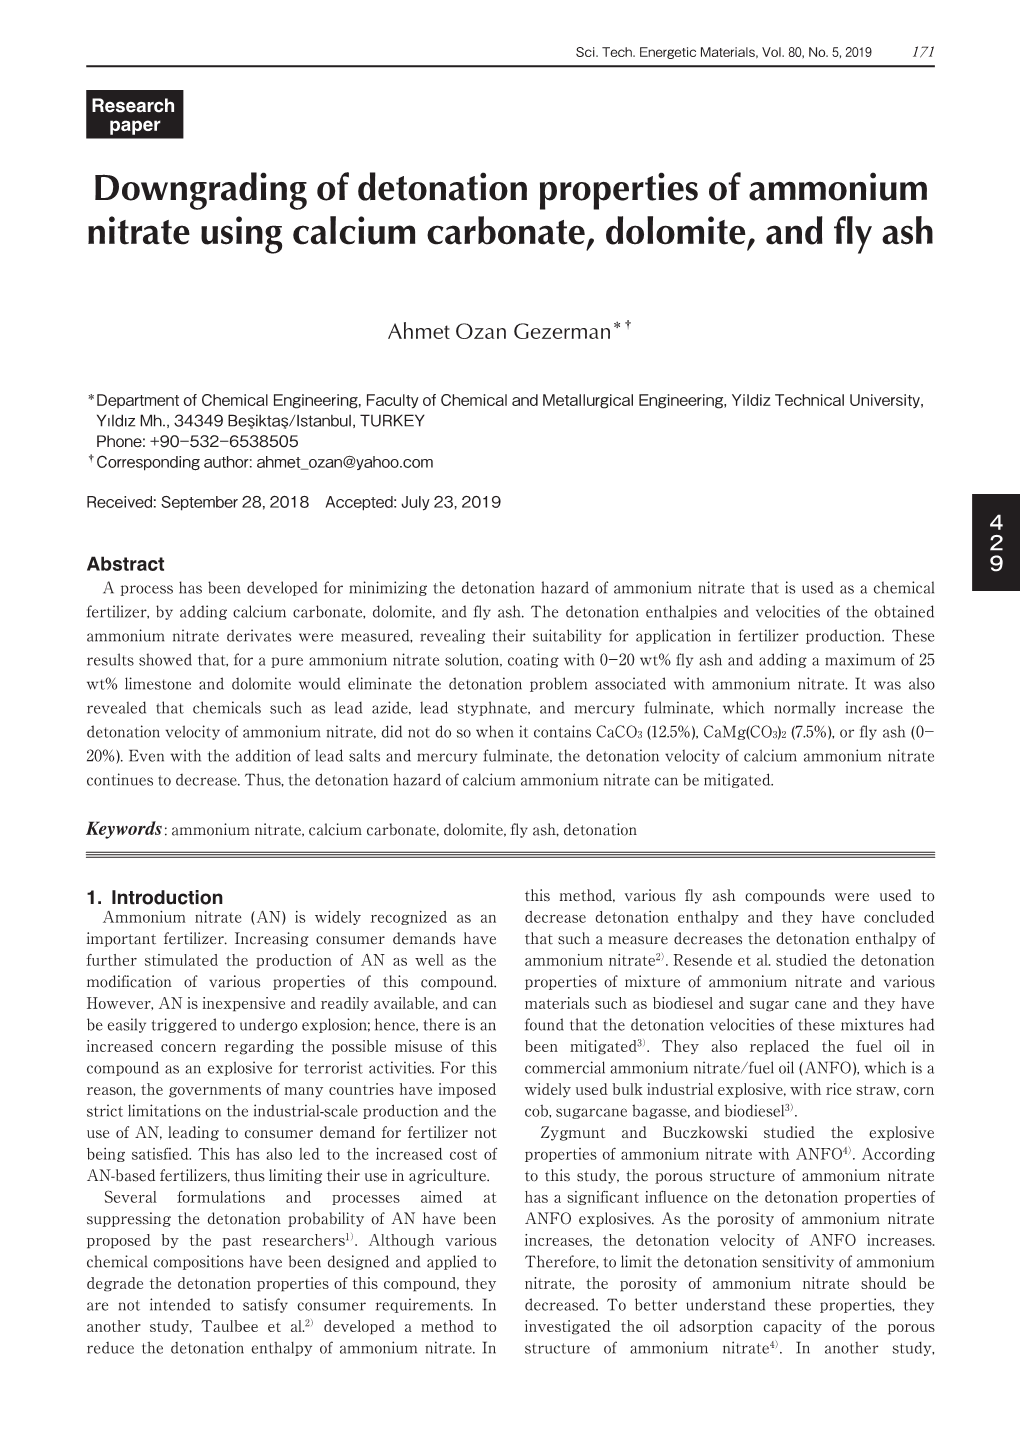 Downgrading of Detonation Properties of Ammonium Nitrate Using Calcium Carbonate, Dolomite, and Fly Ash